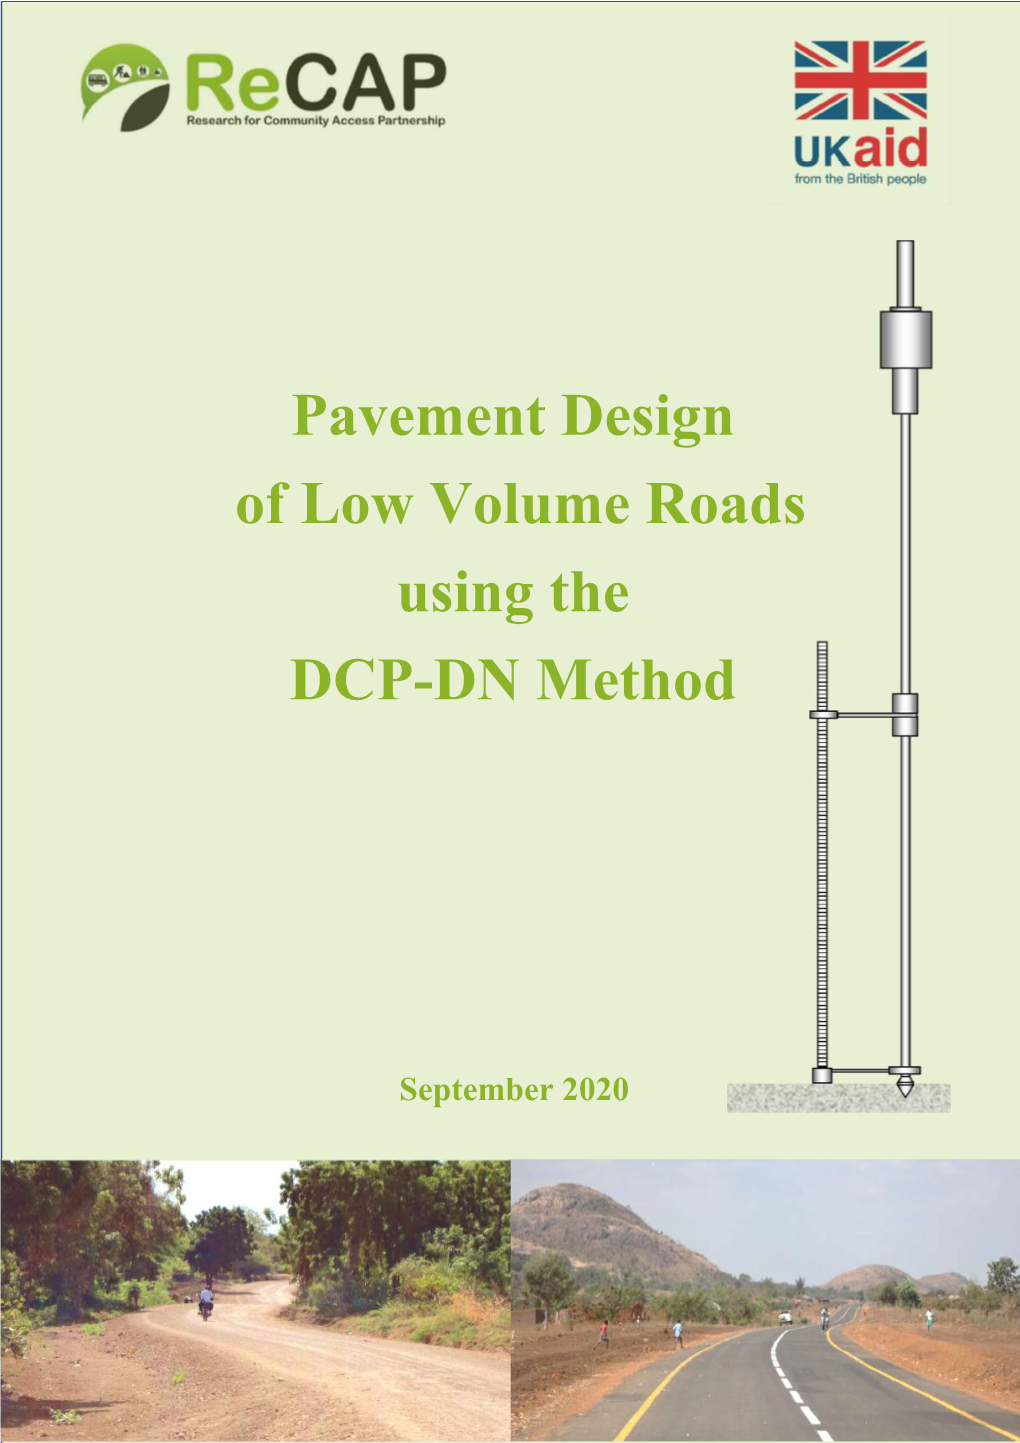 Pavement Design of Low Volume Roads Using the DCP-DN Method